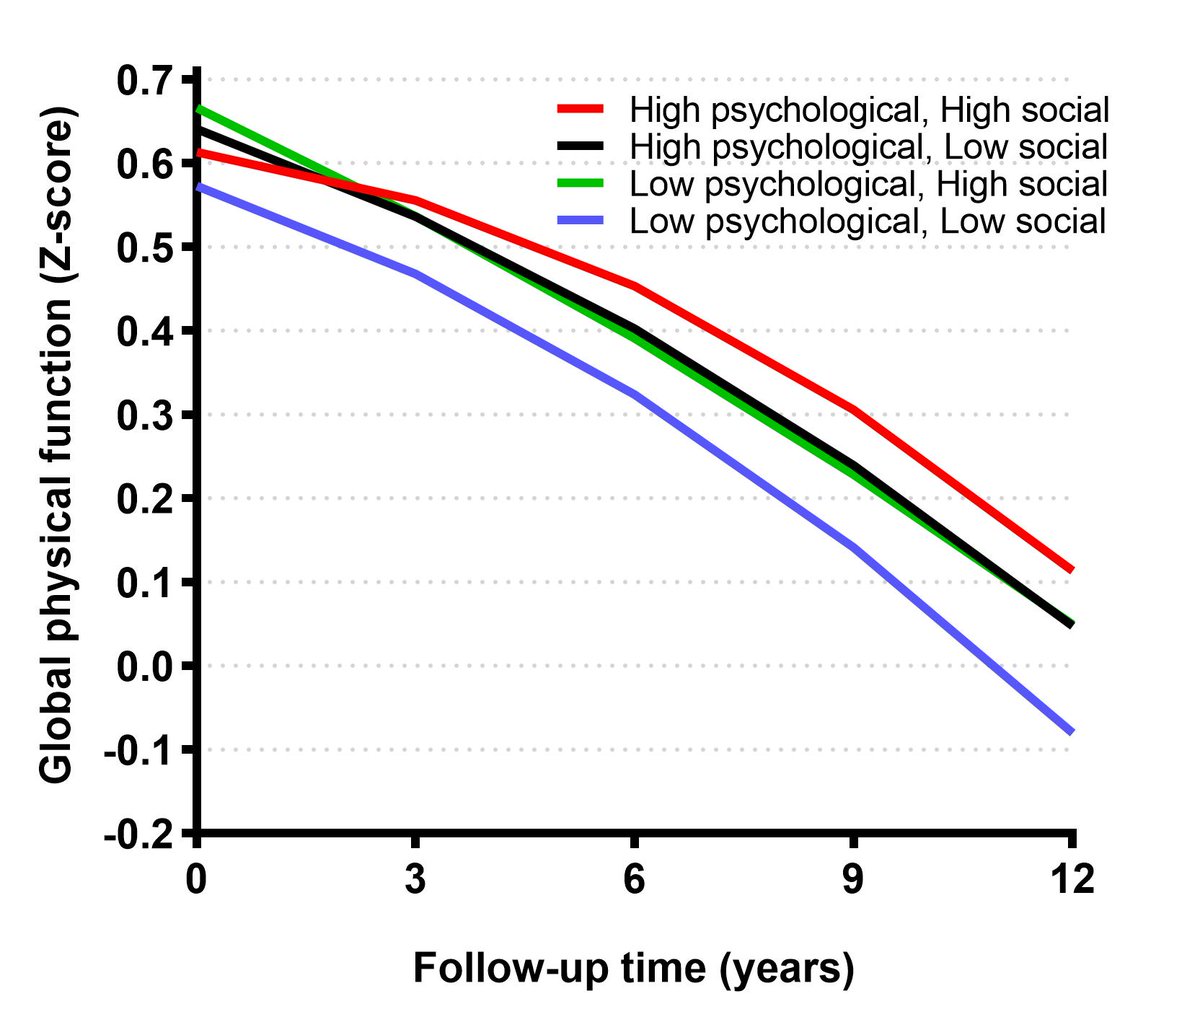 #Olderadults with high psychological and social well-being show the slowest decline in #physicalfunction over 12-year follow-up! Find our latest findings from SNAC-K academic.oup.com/biomedgerontol… @geronsociety @OxfordJournals @AmaiaCalderon @AnnaKarinWelmer @sdekhty04